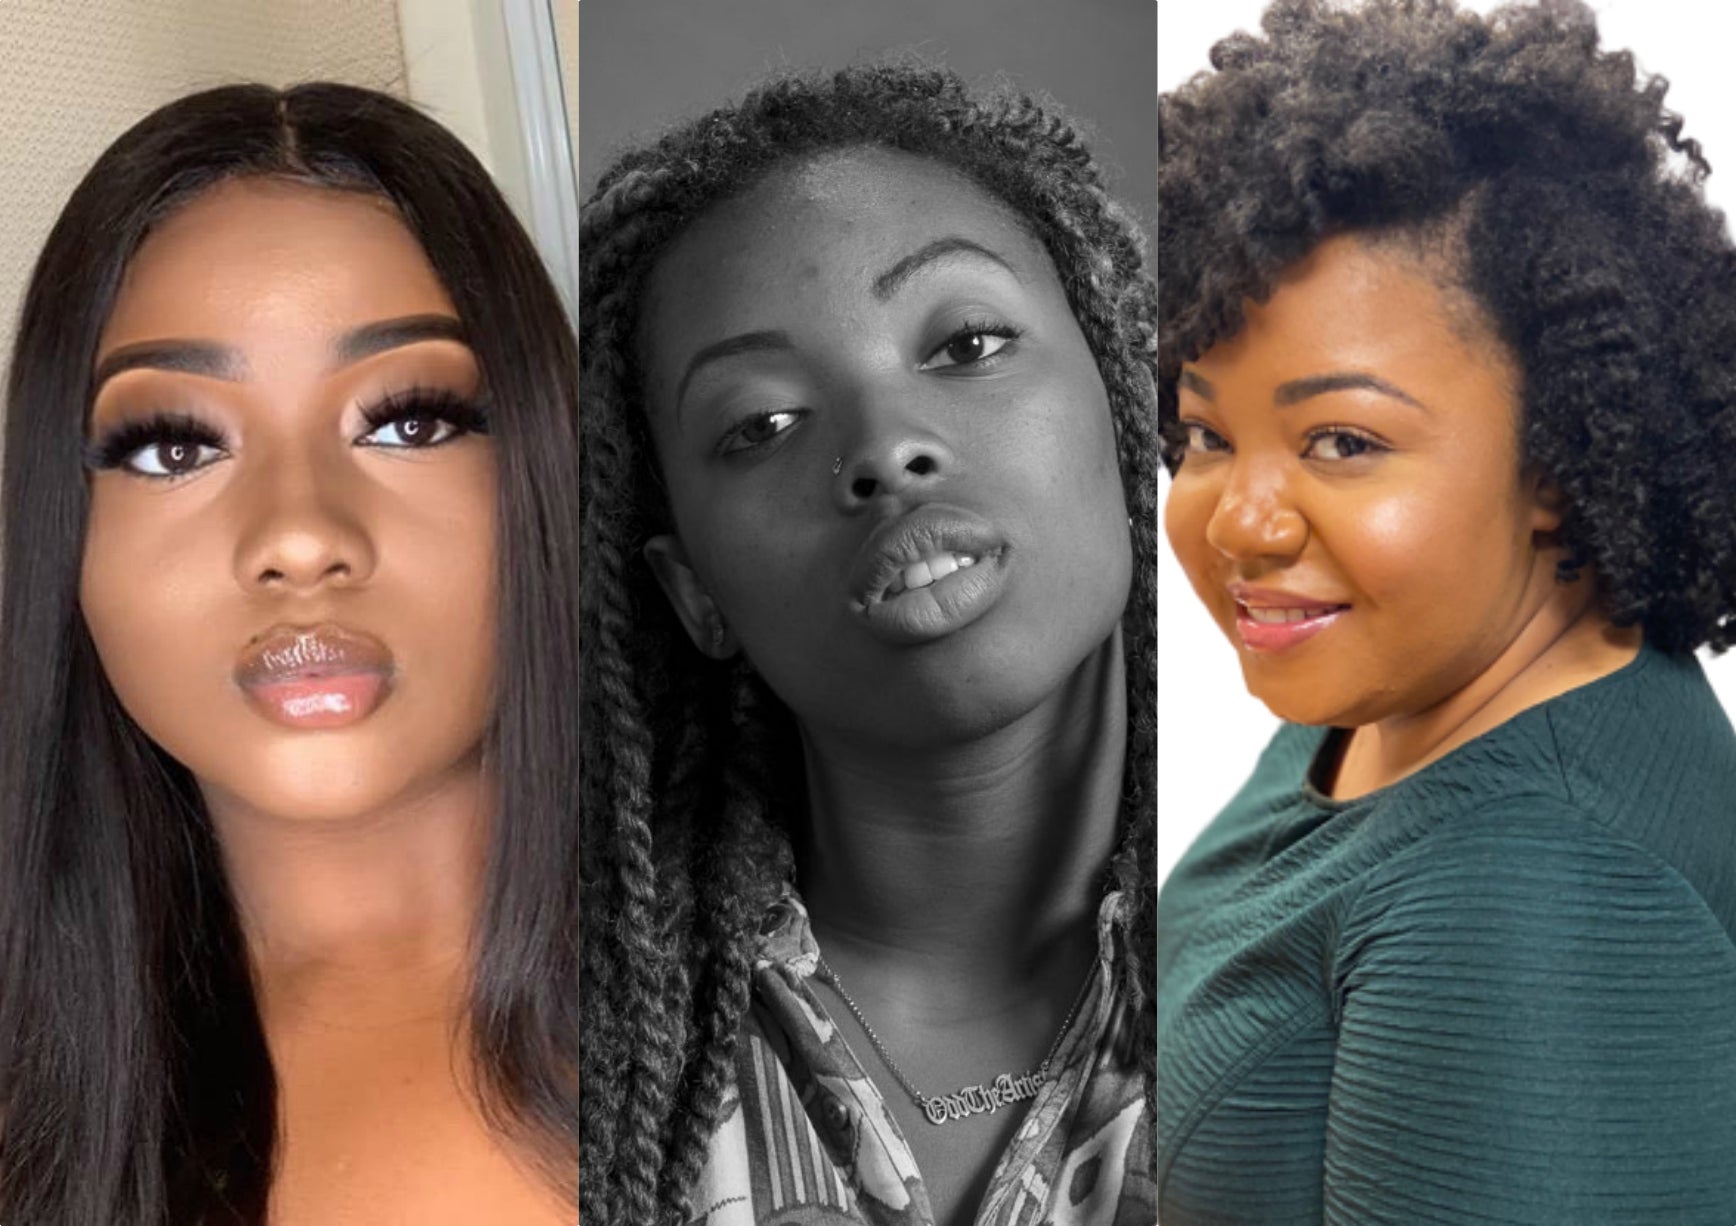 Gen Z Black Women From 5 Different Cities Sound Off On The Changes They Want To See Following #Election2020